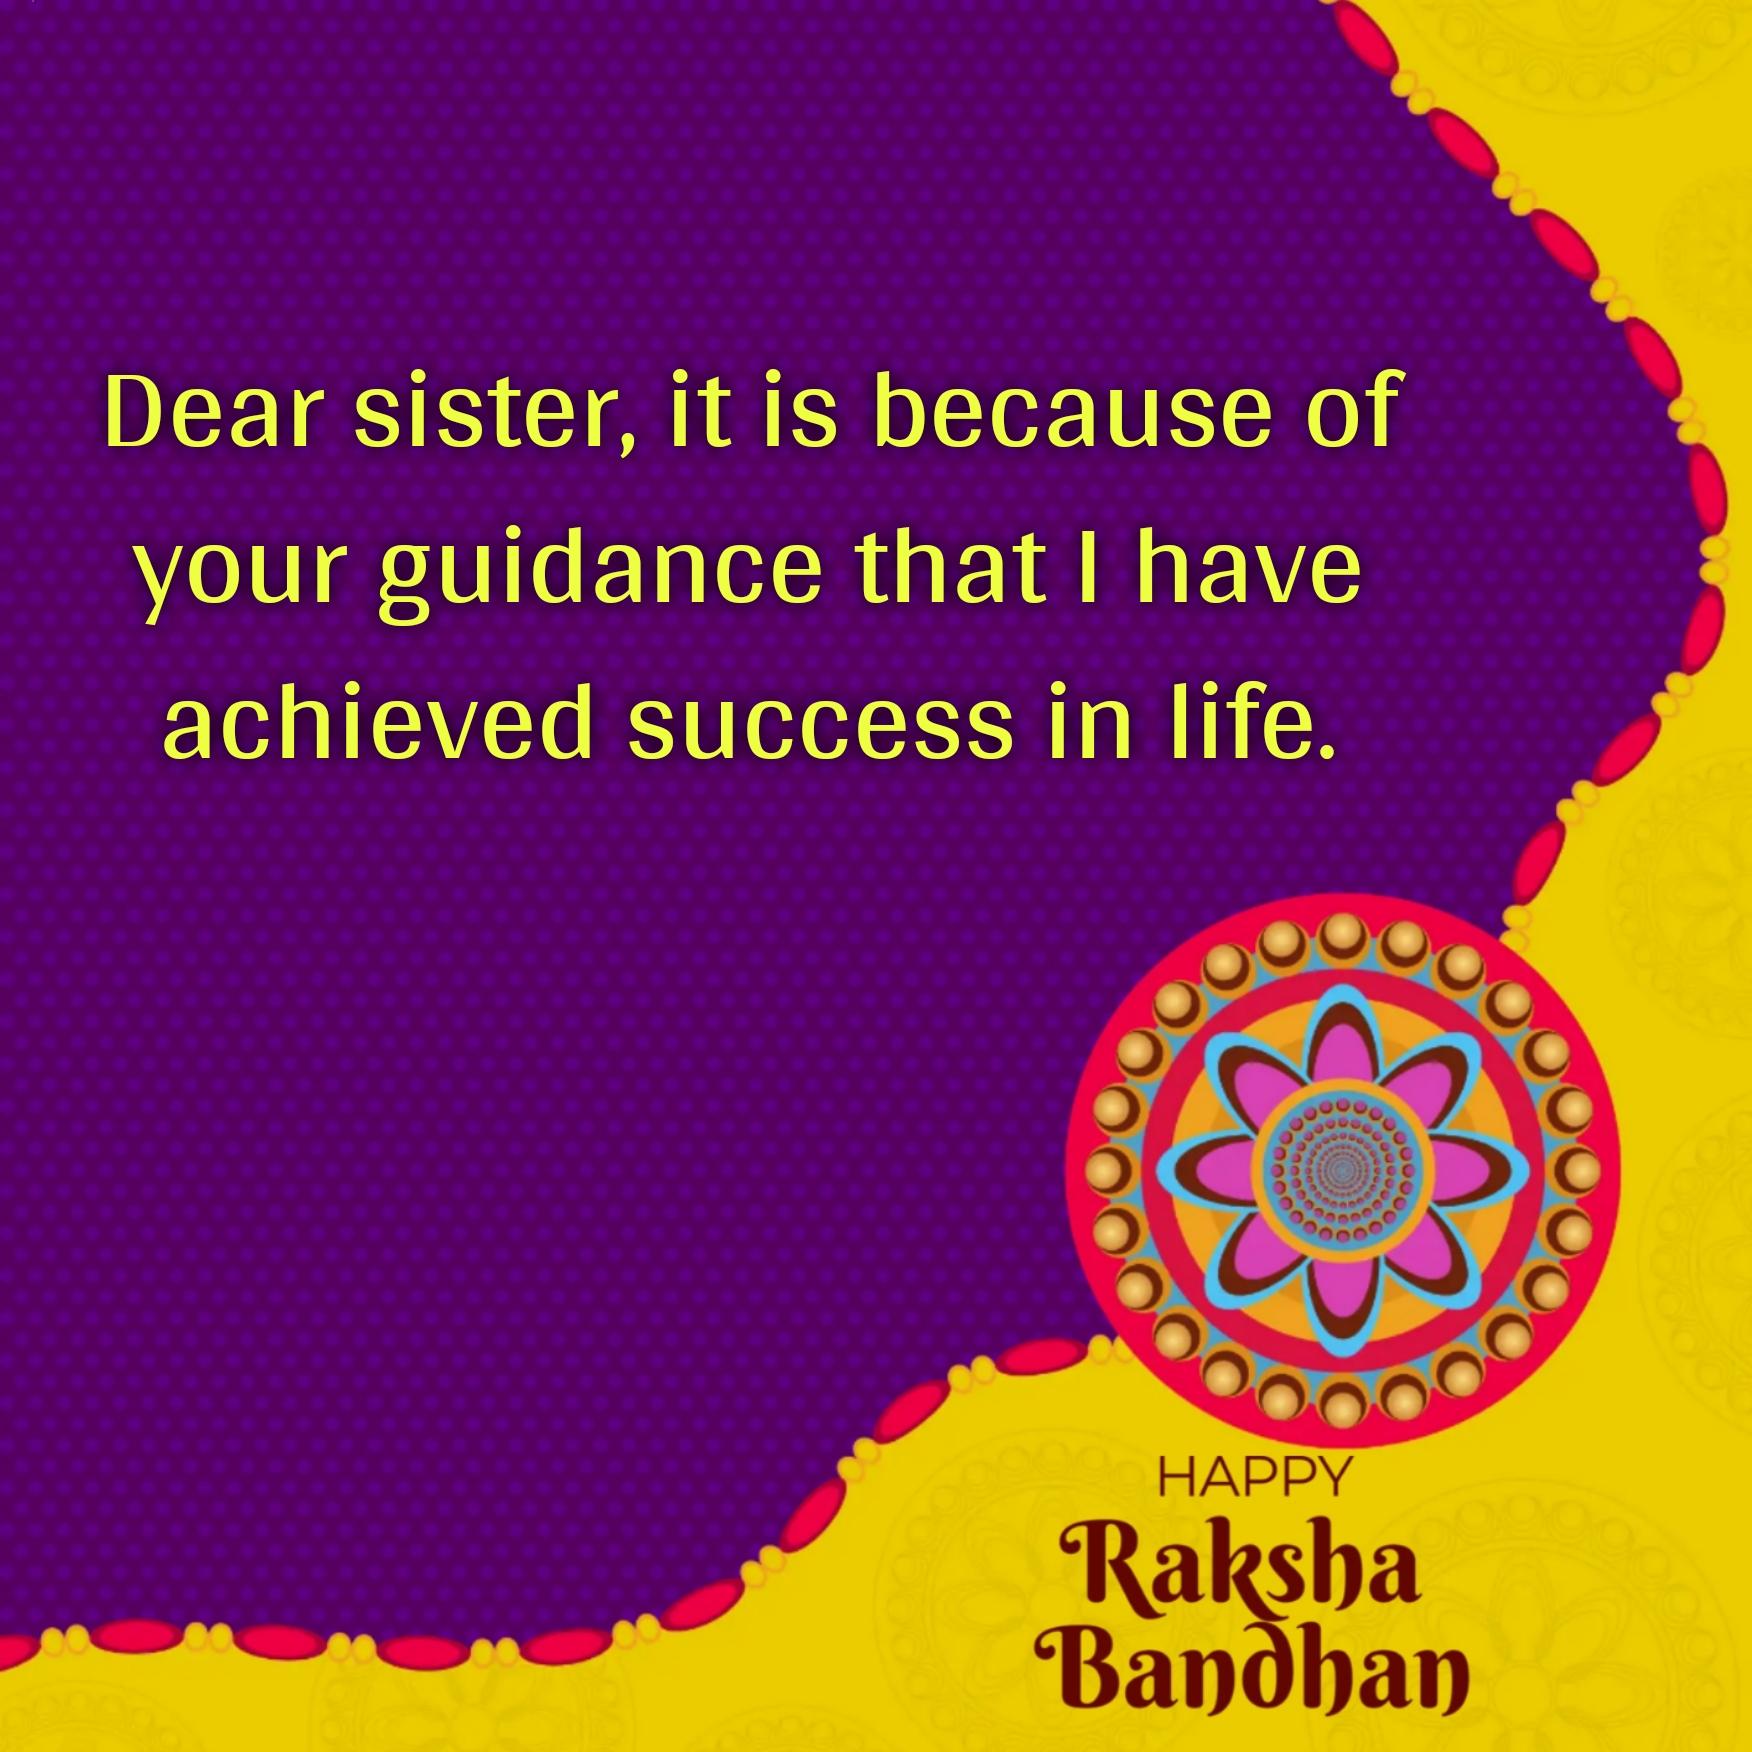 Dear sister it is because of your guidance